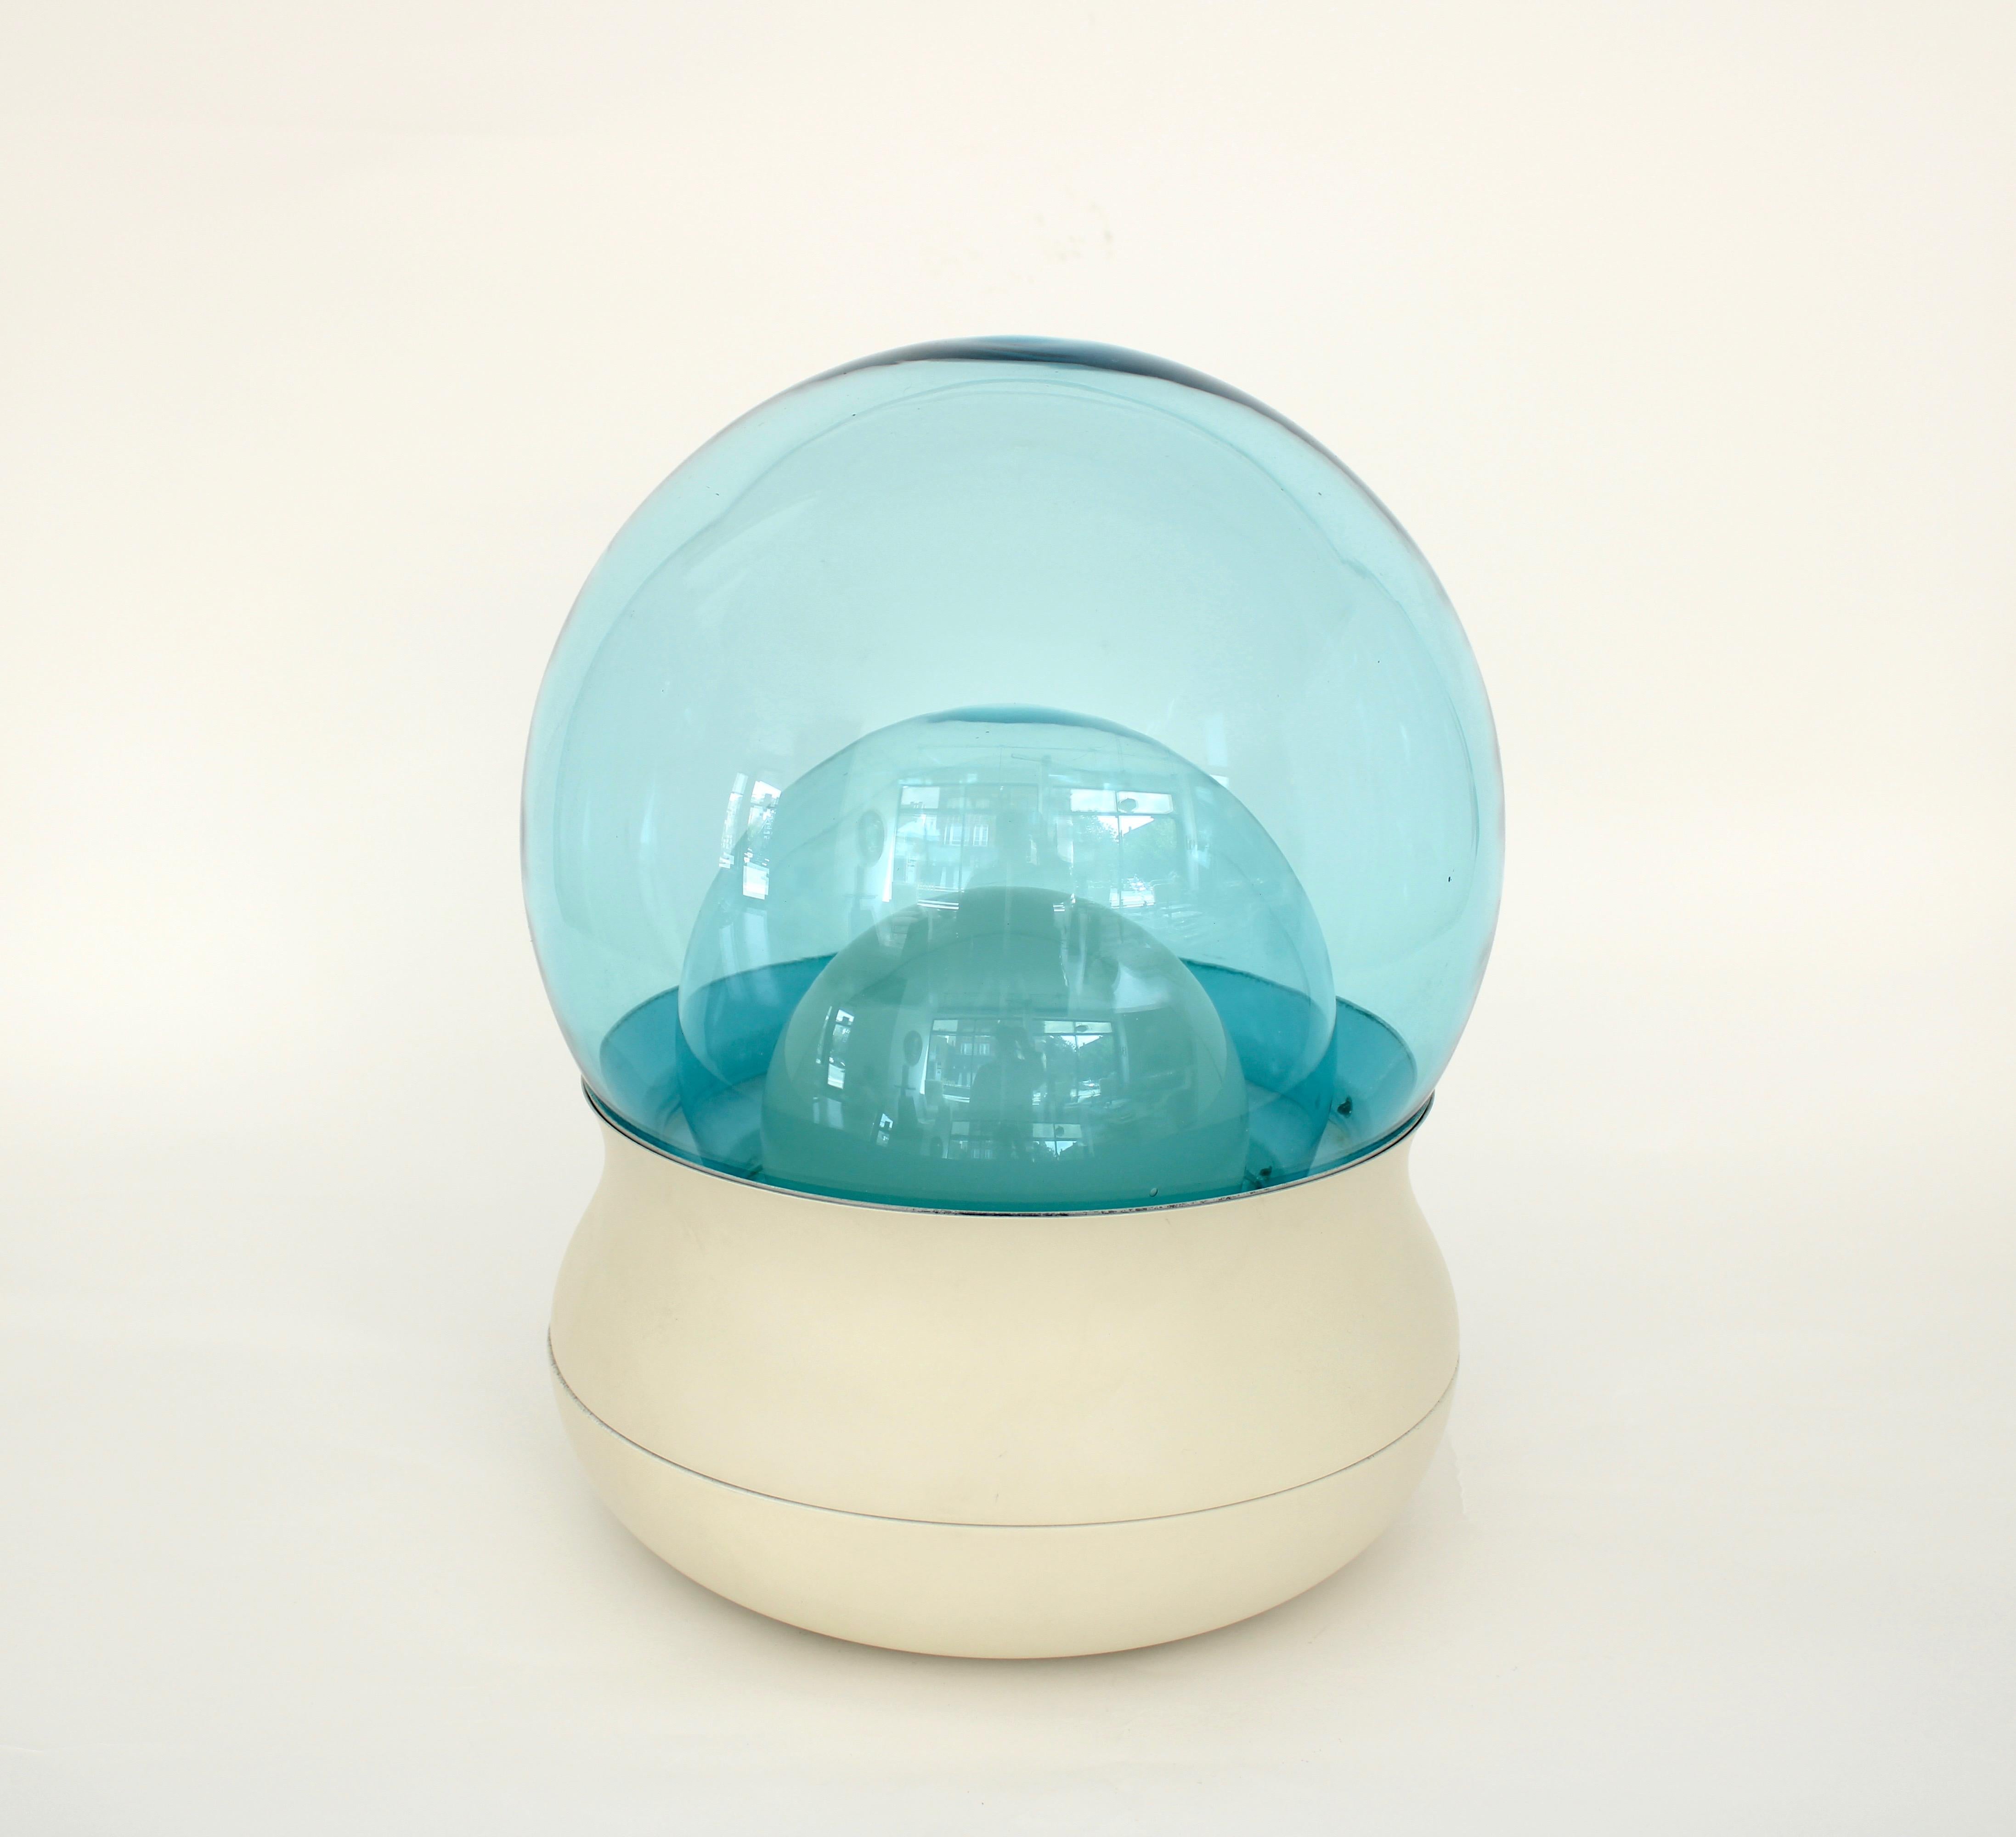 Stilnovo Italian glass table lamp with two blue glass domes over an opaque glass dome concealing a single bulb. This lamp presents as a light sculpture and also give off a nice ambient light. The blue of the glass is like a blue sky and the glass is